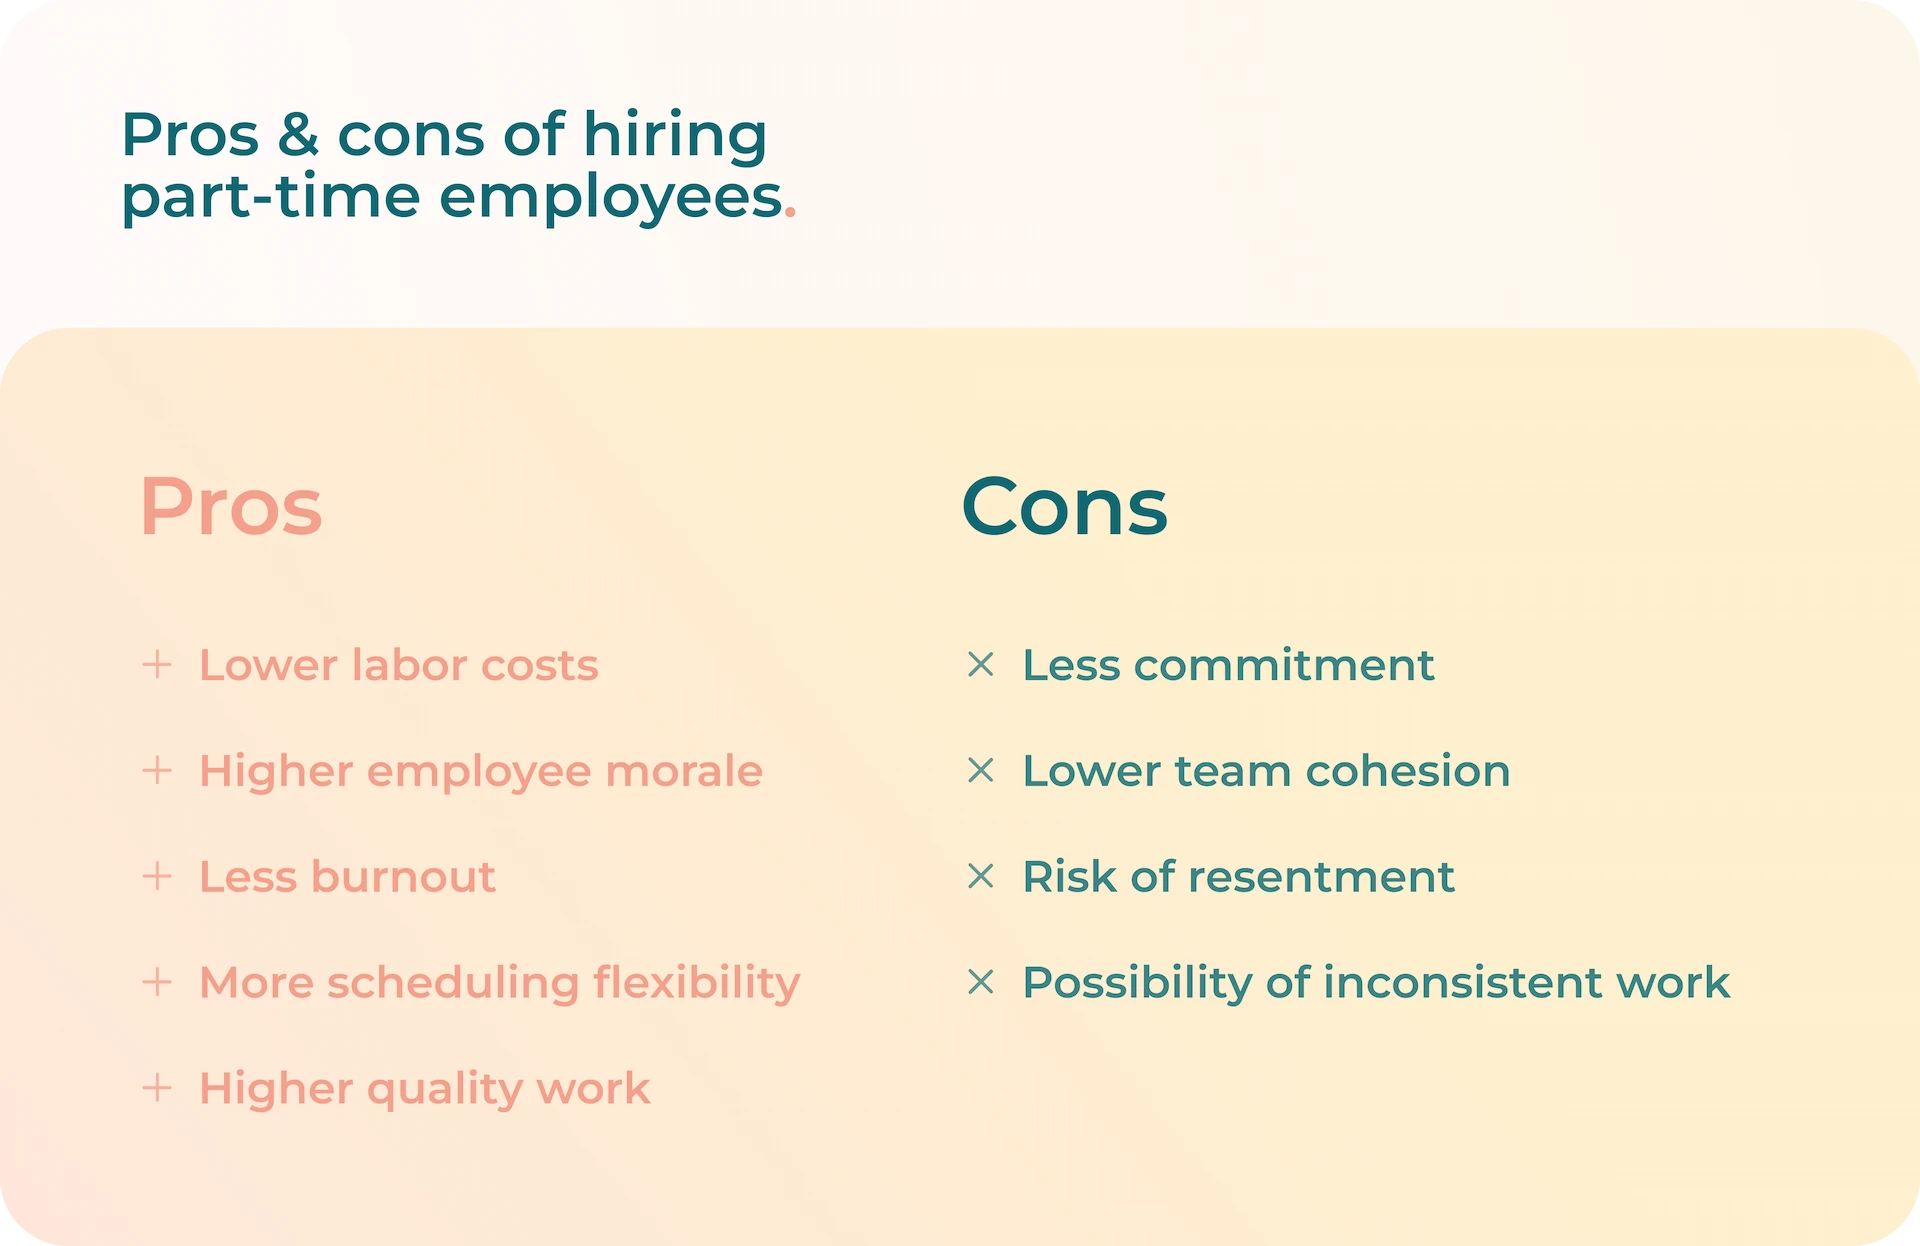 List of pros and cons of hiring part-time employees